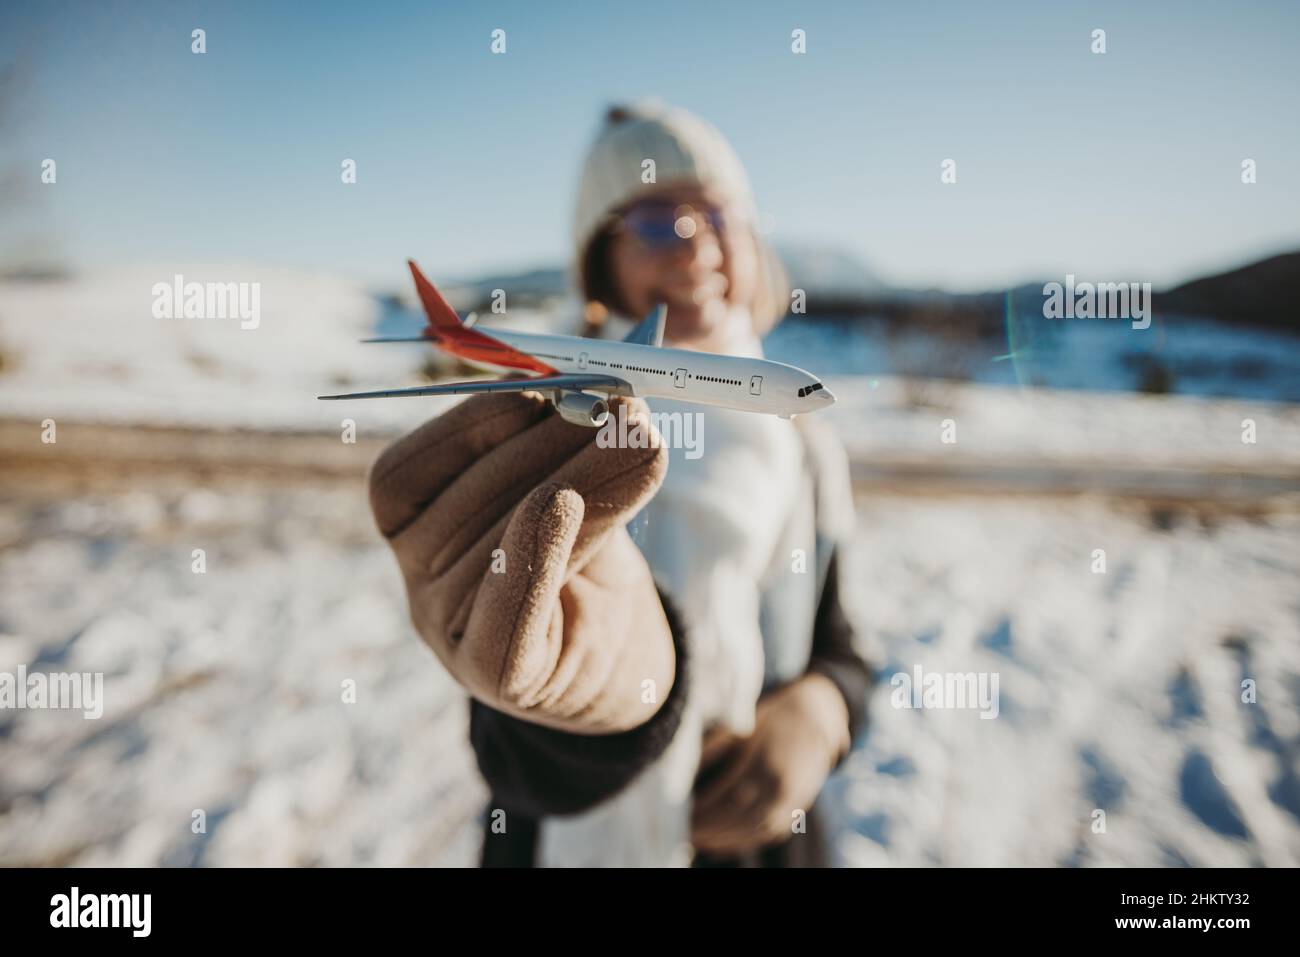 Selective focus shot of a toy airplane on smiling Caucasian female's hand while in snowy outdoors Stock Photo